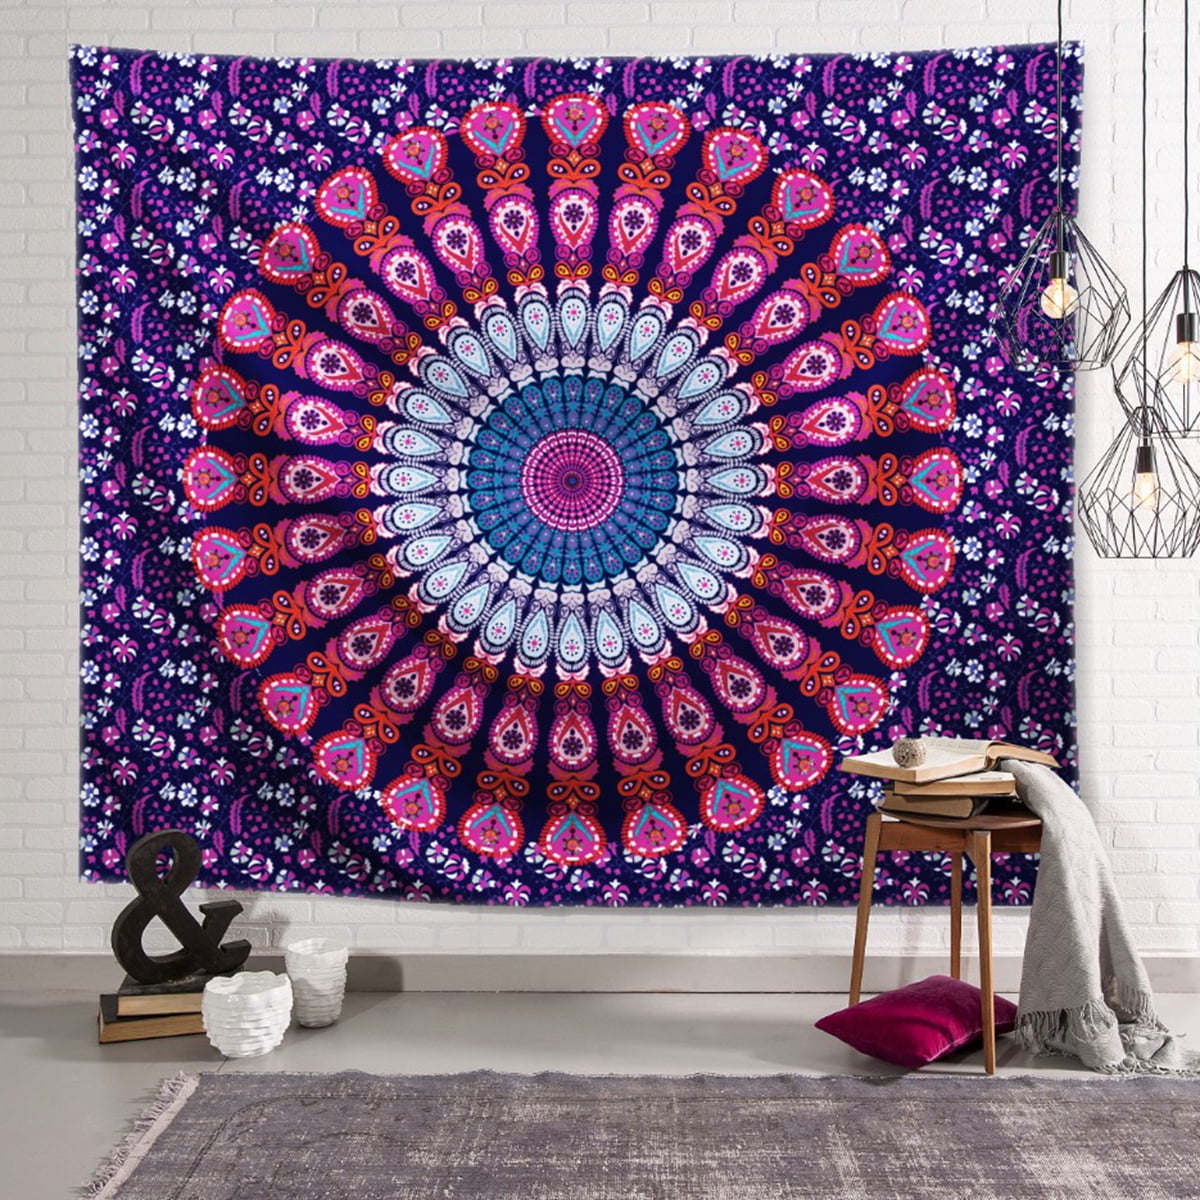 Indian Mandala Tapestry Totem Bohemian Wall Hanging Queen Bedspread Throw NEW 